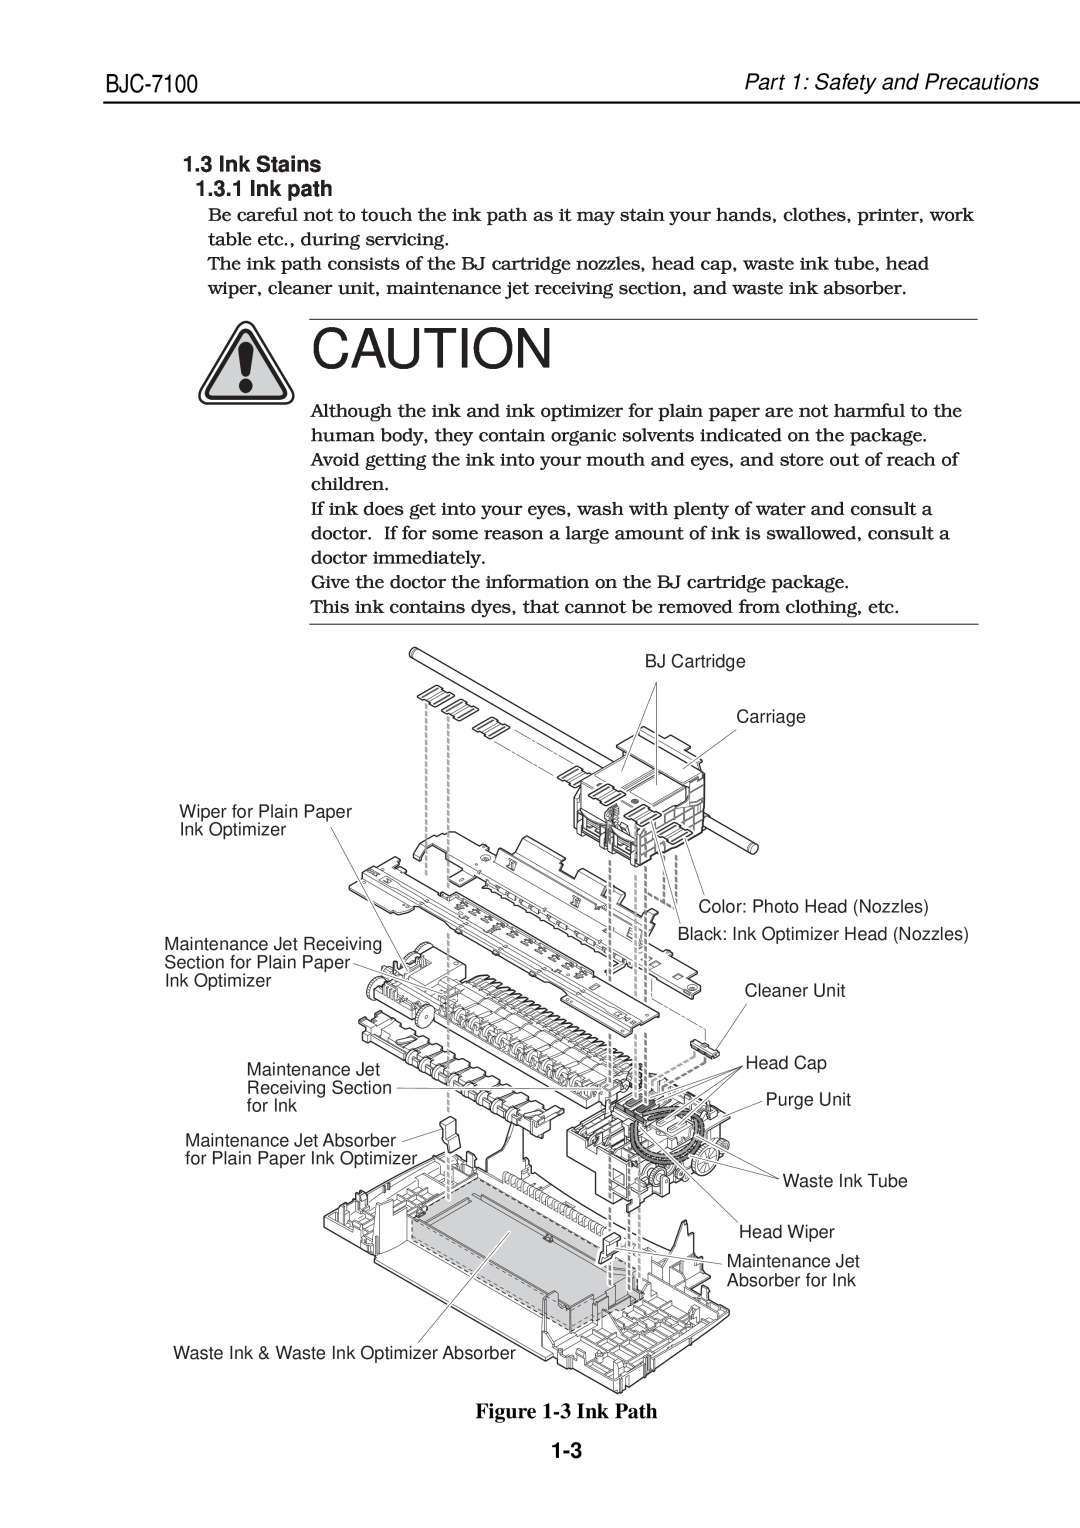 Canon QY8-1360-000 manual Ink Stains 1.3.1 Ink path, 3 Ink Path, BJC-7100, Part 1 Safety and Precautions 